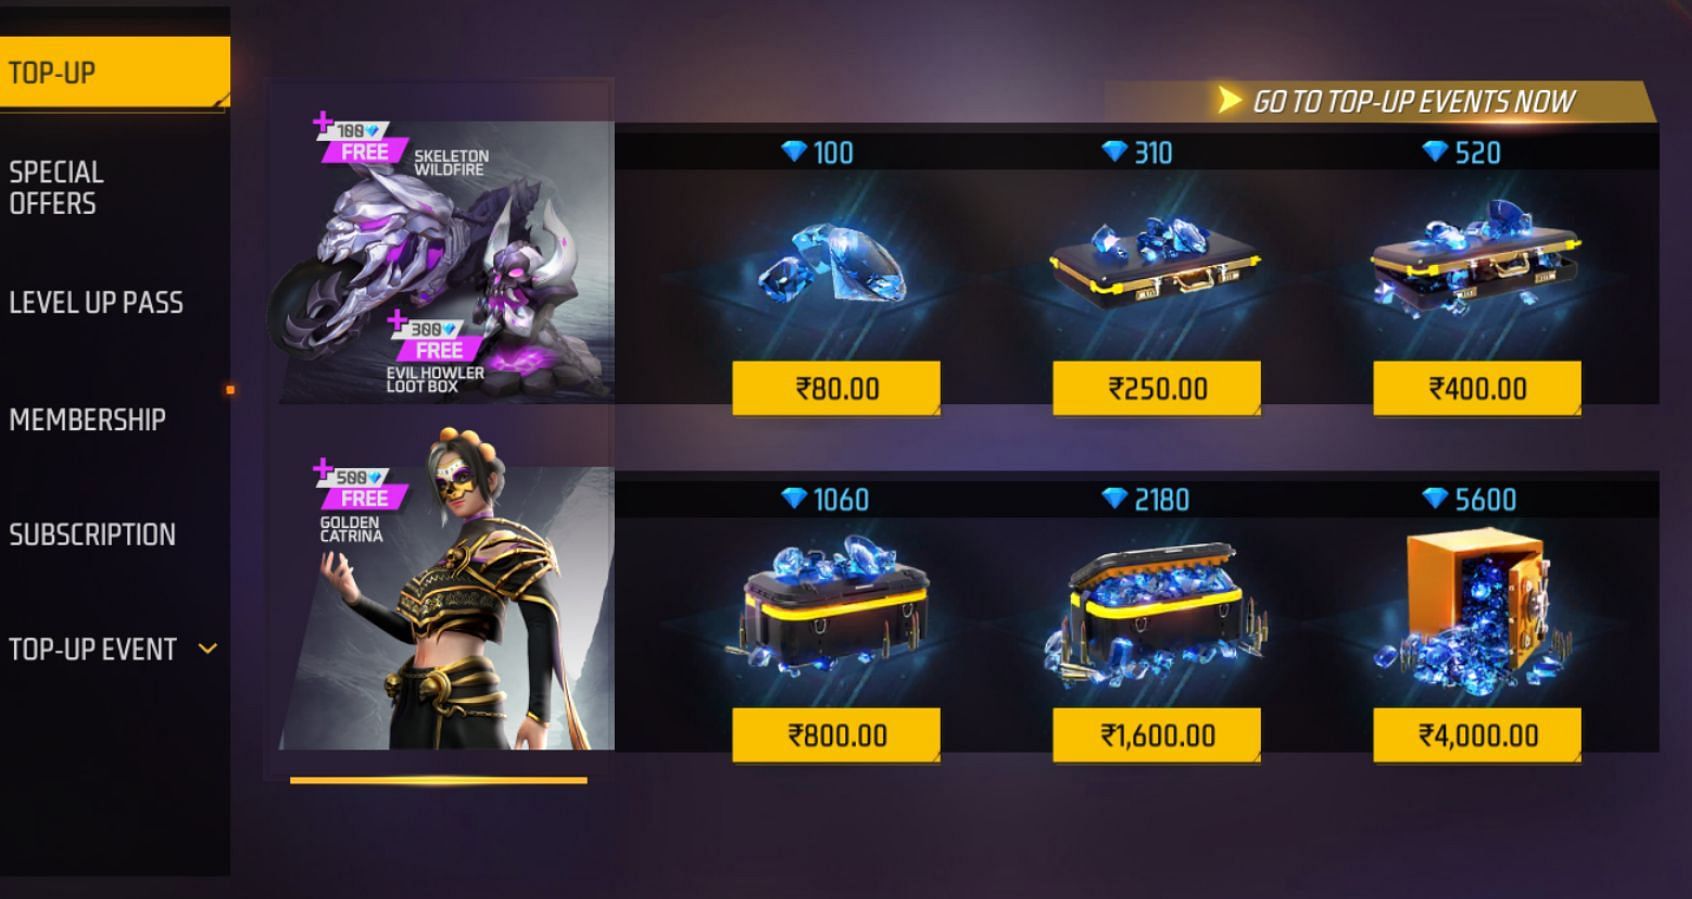 A step-by-step guide to purchasing diamonds for the Howler Top-Up event (Image via Garena)